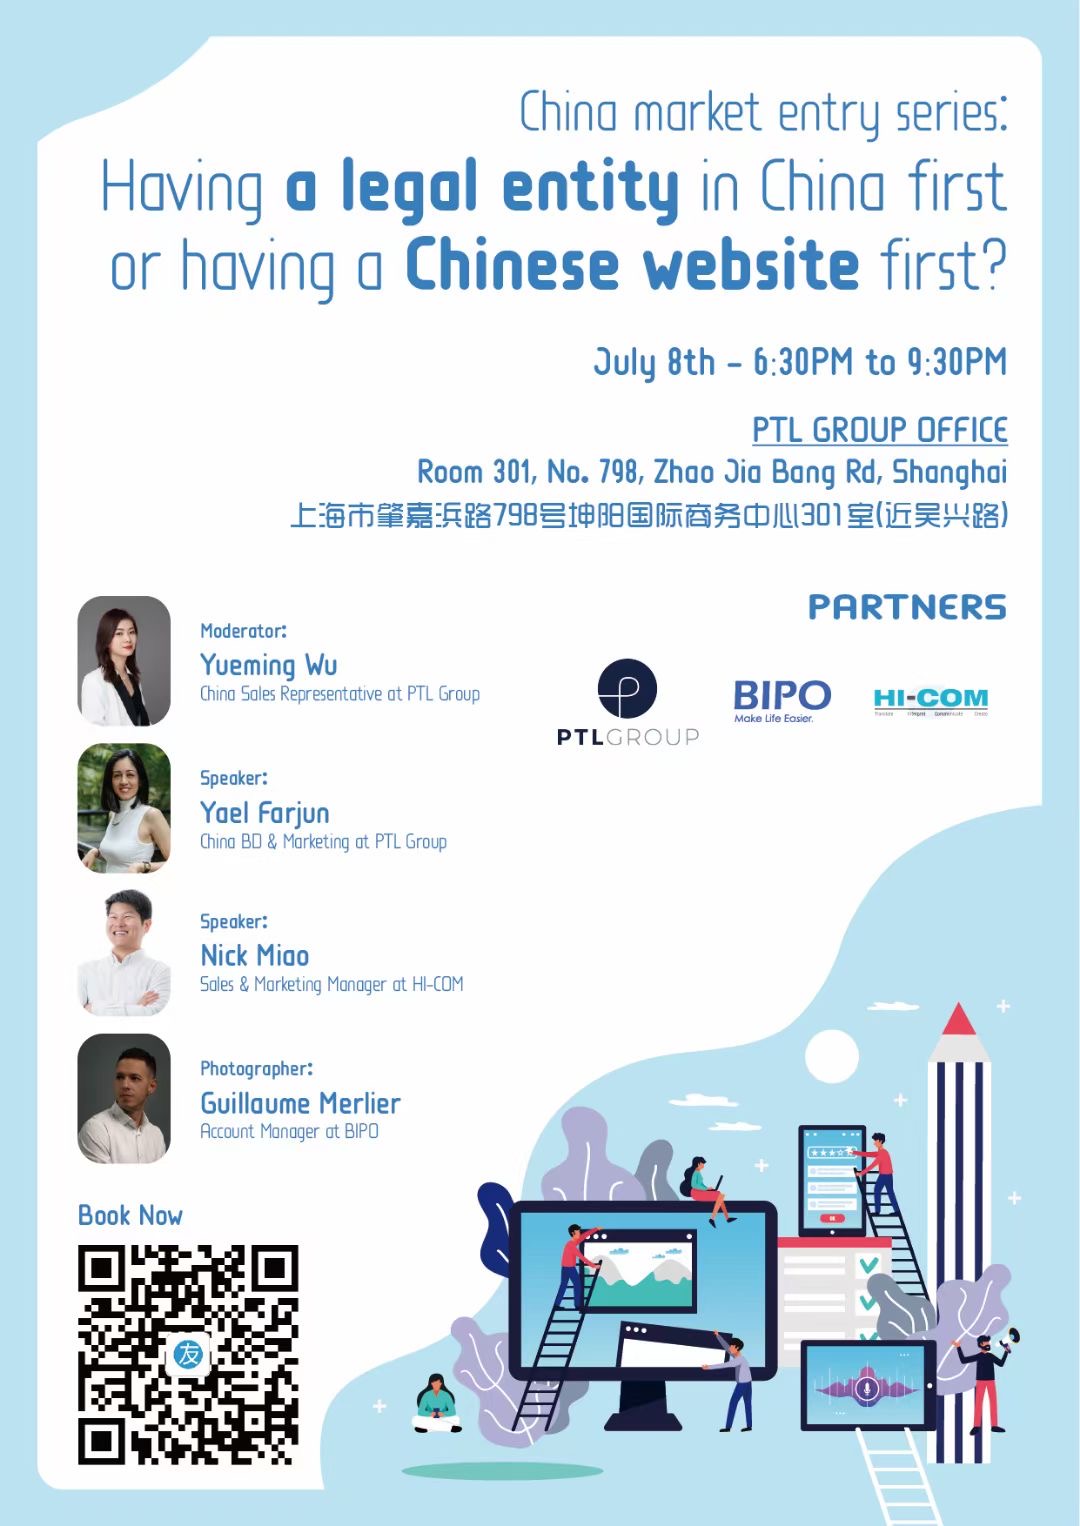 Having a legal entity in China first or having a Chinese website first?